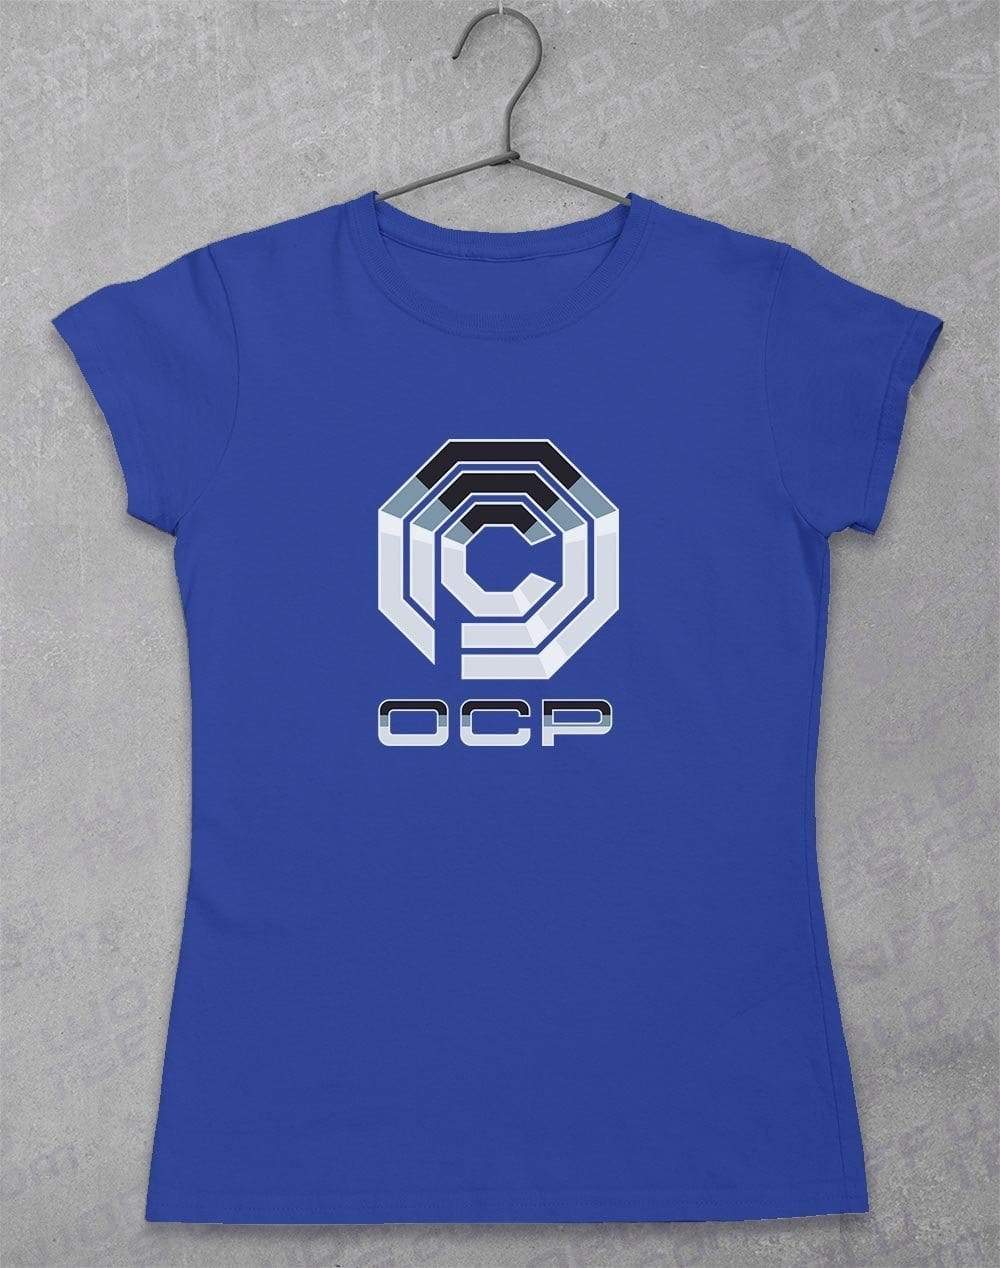 Omni Consumer Products - Women's T-Shirt 8-10 / Royal  - Off World Tees